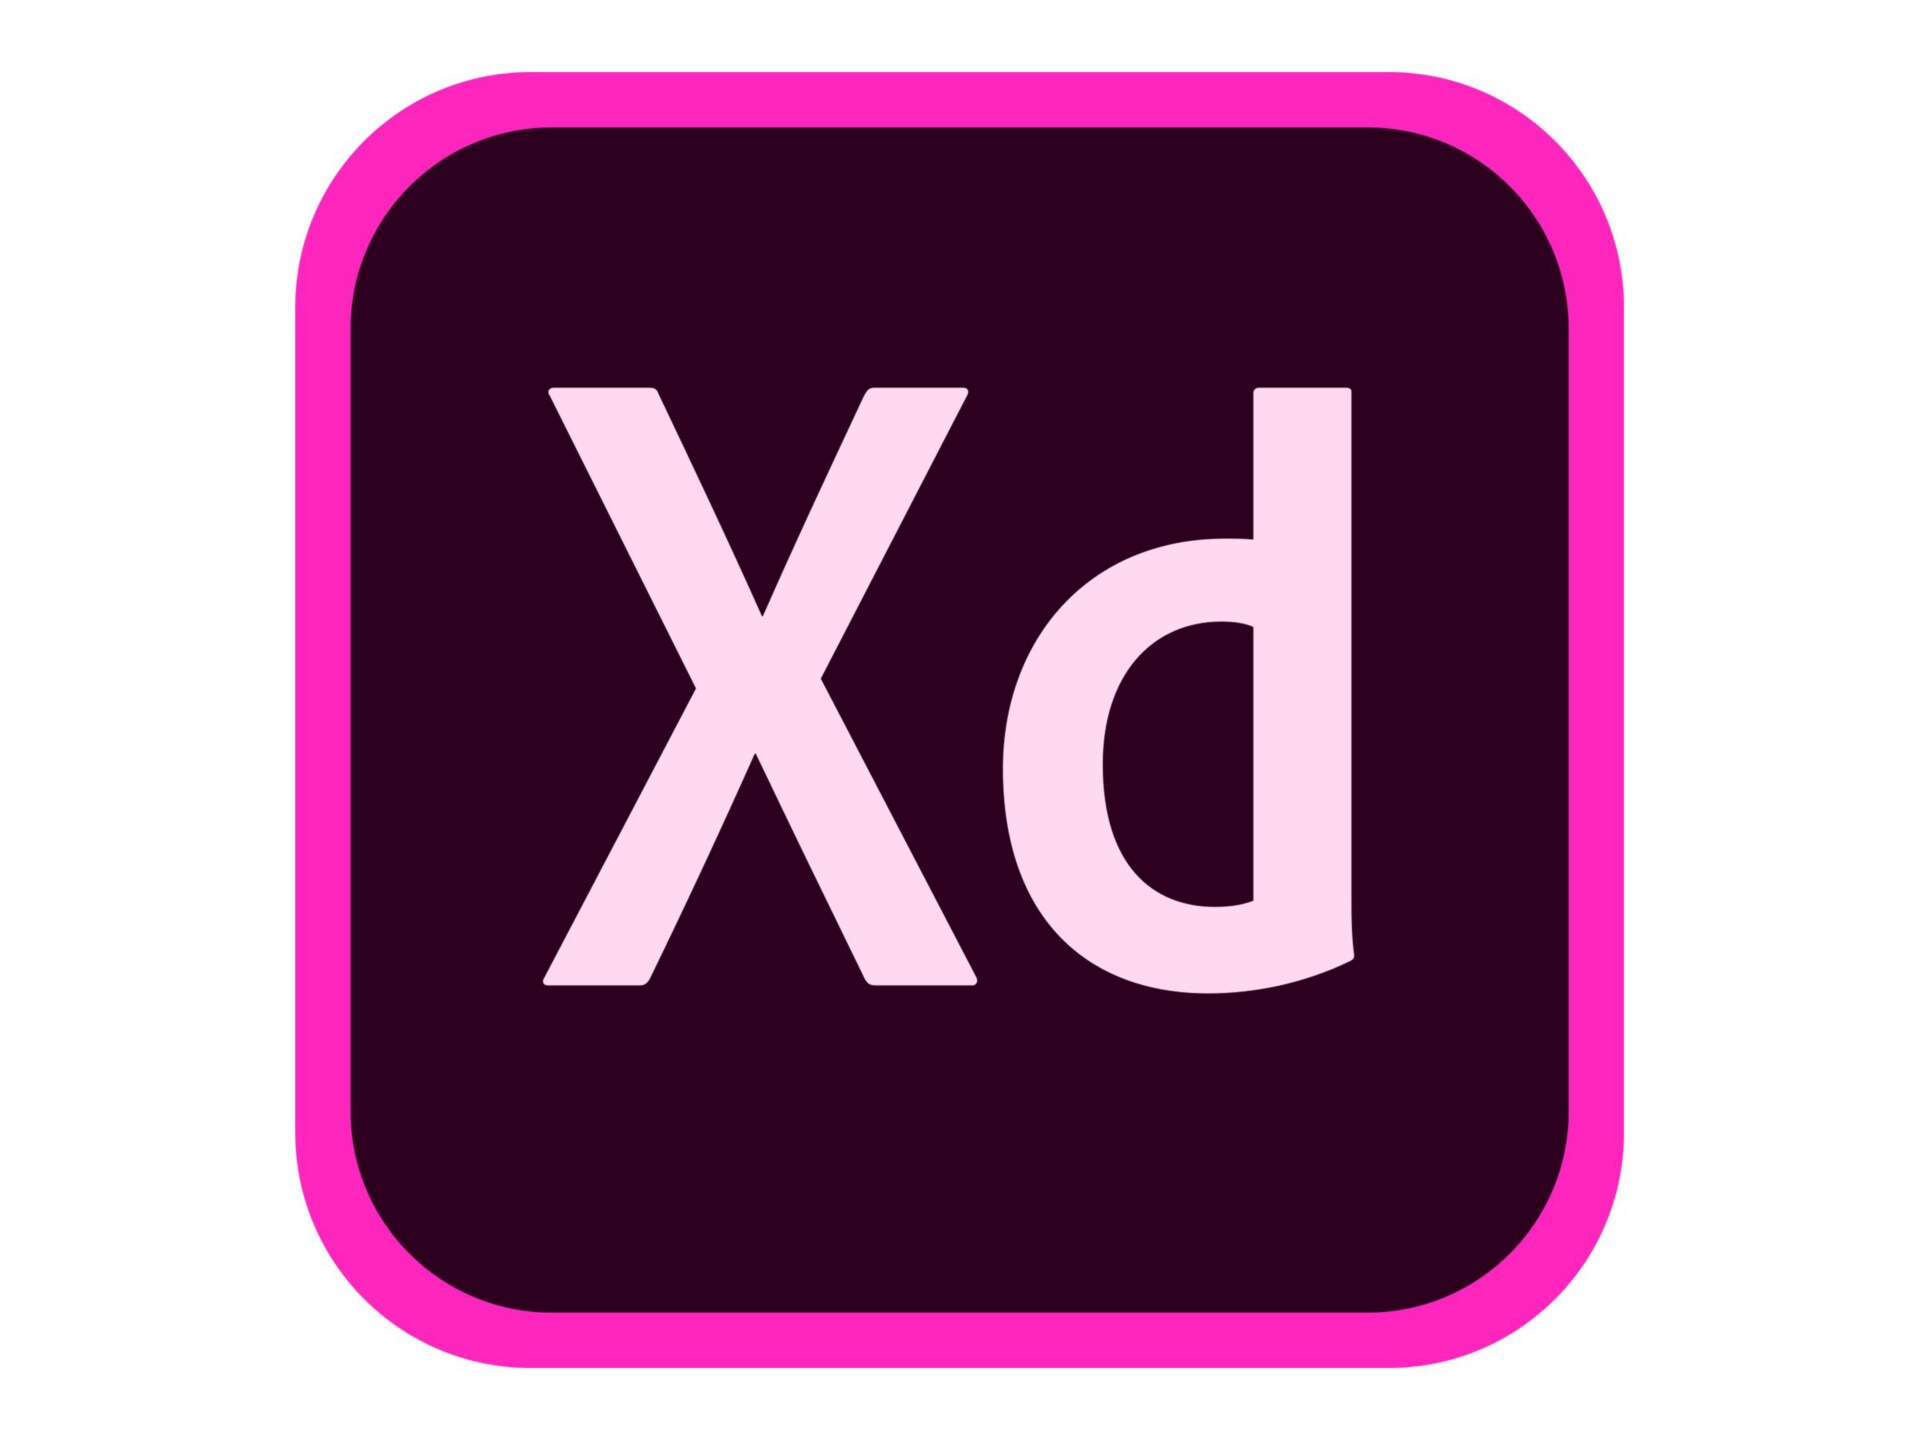 Adobe XD CC for Teams - Subscription New (9 months) - 1 user